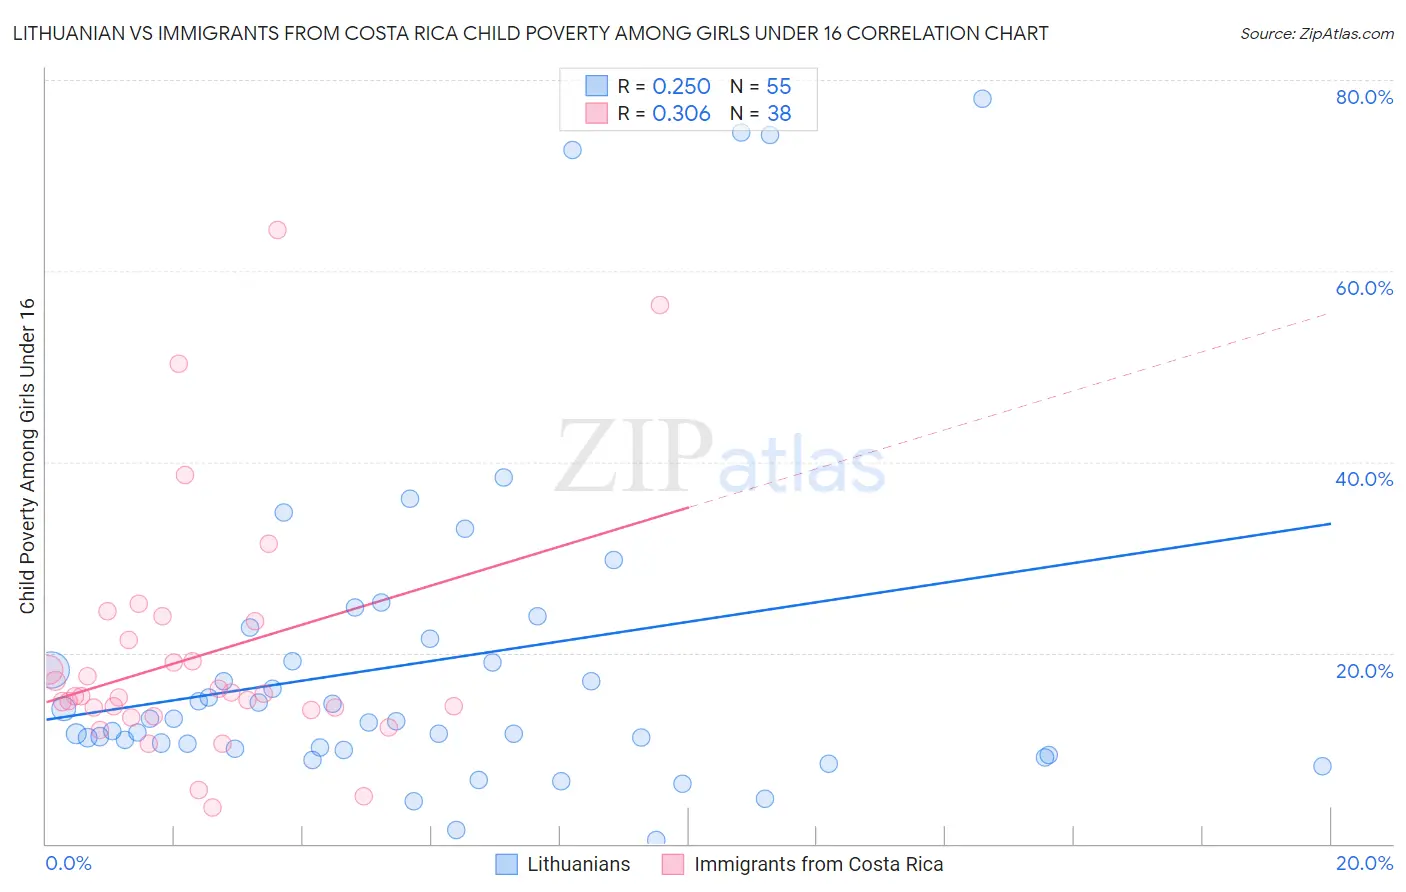 Lithuanian vs Immigrants from Costa Rica Child Poverty Among Girls Under 16